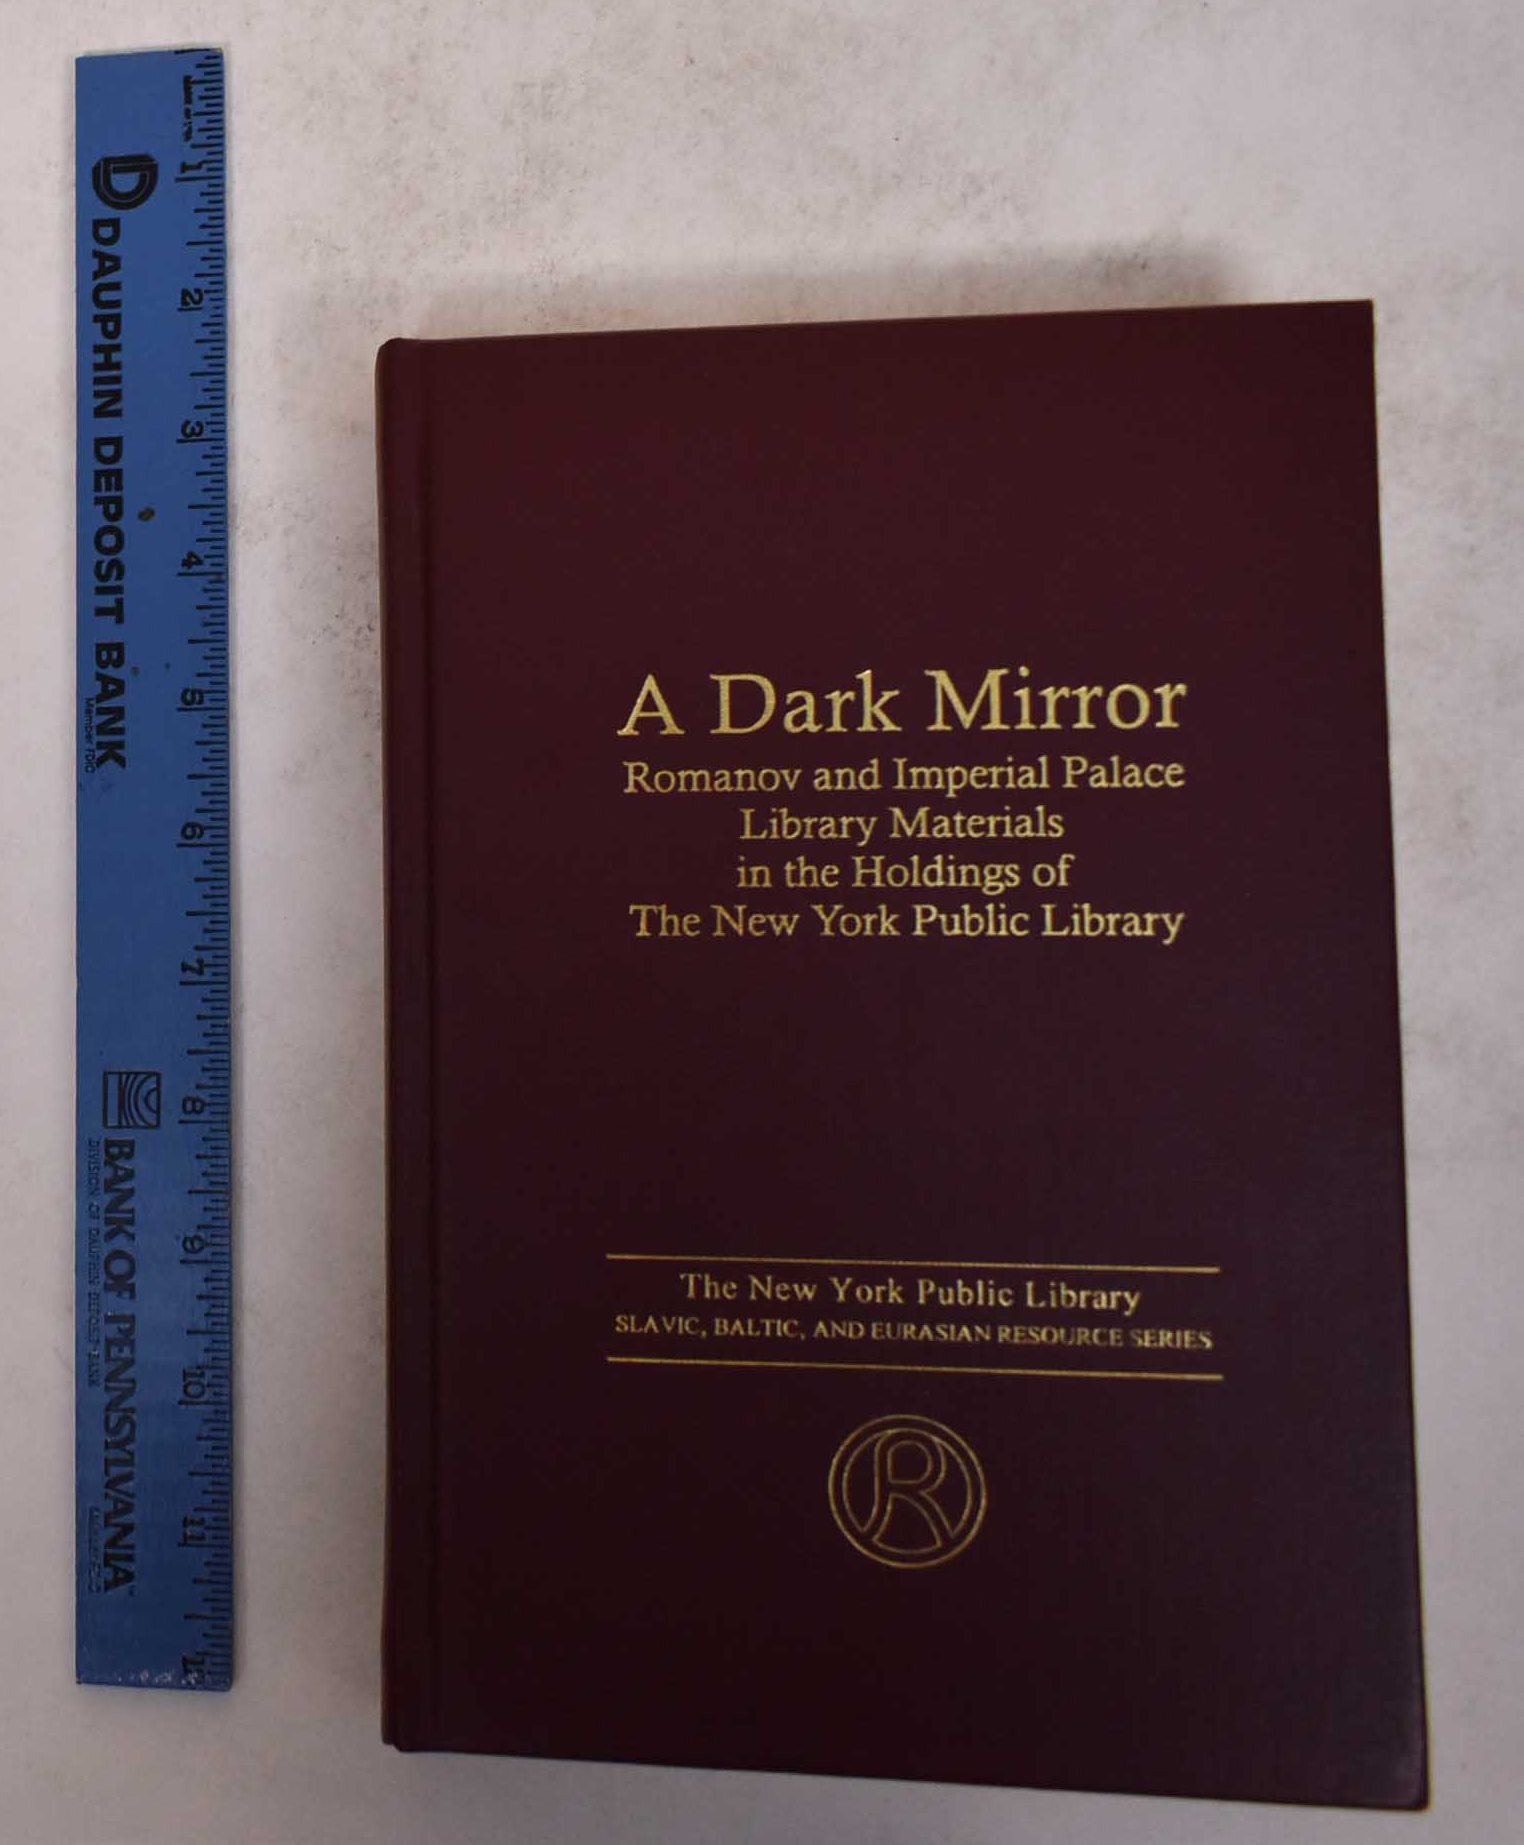 A Dark Mirror: Romanov and Imperial Palace Library Materials int he Holdings of the New York Public Library - Davis, Robert H., Marc Raeff, et al.